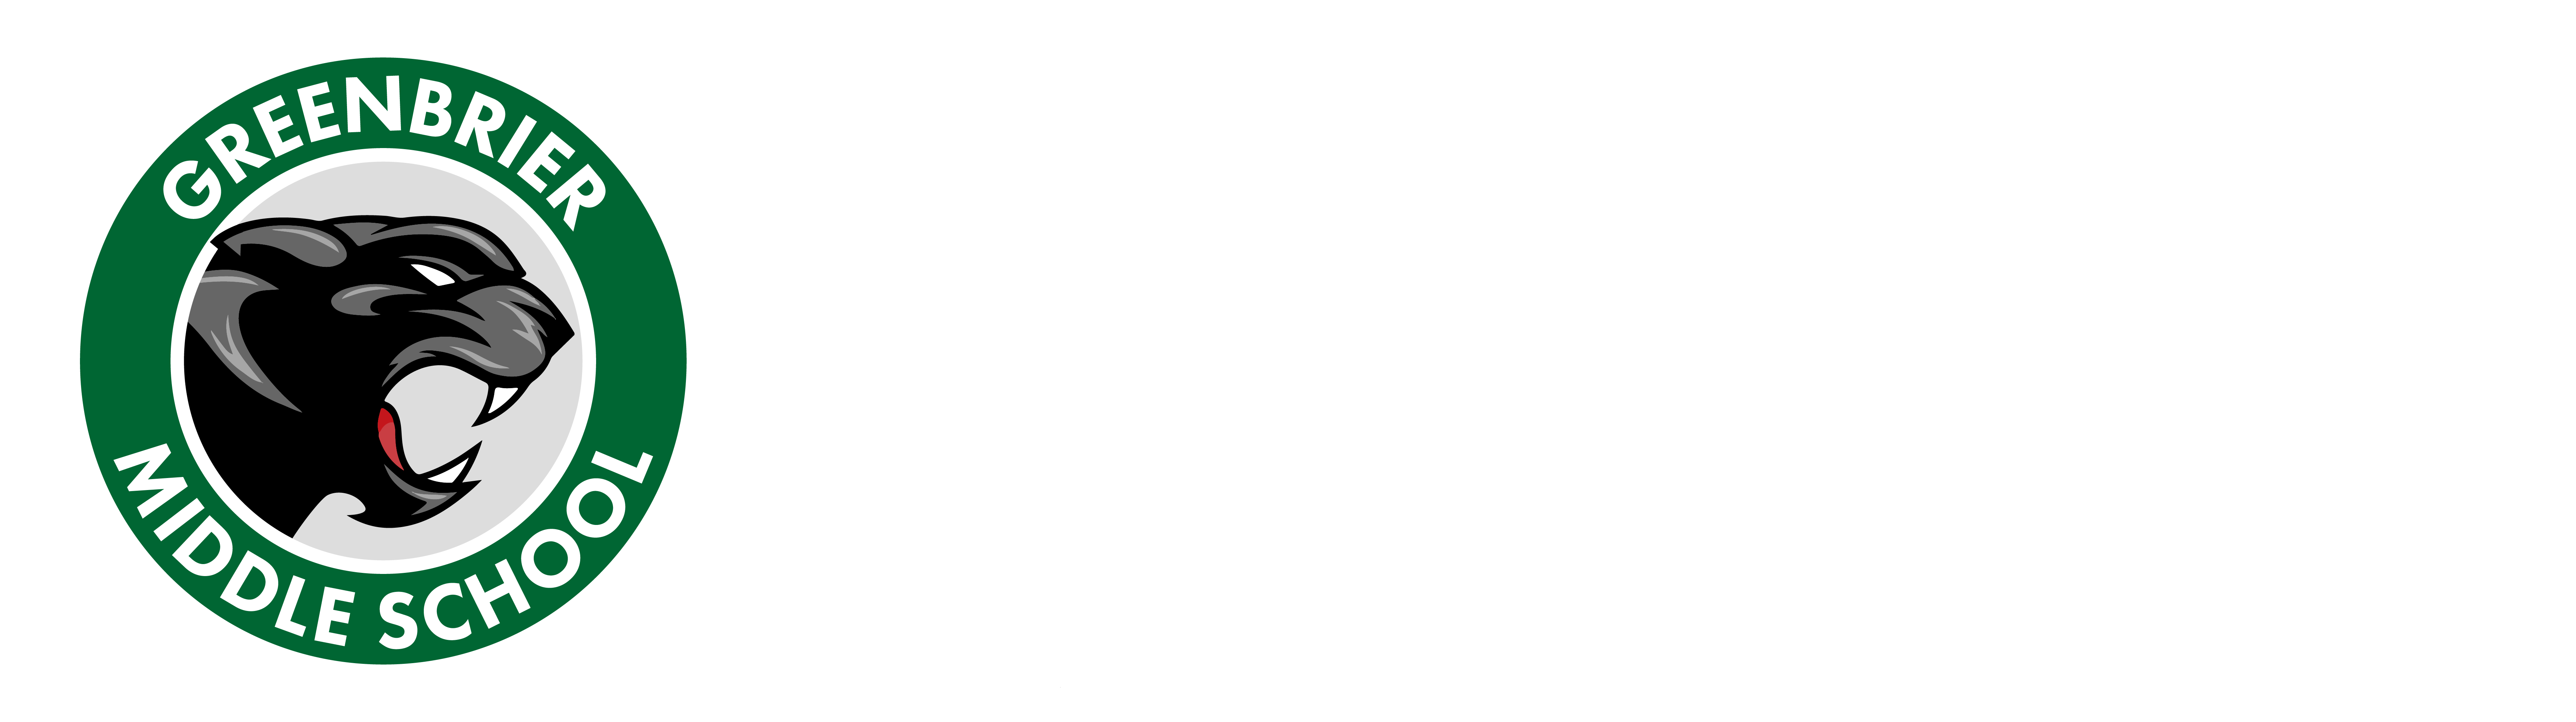 Administration | Greenbrier Middle